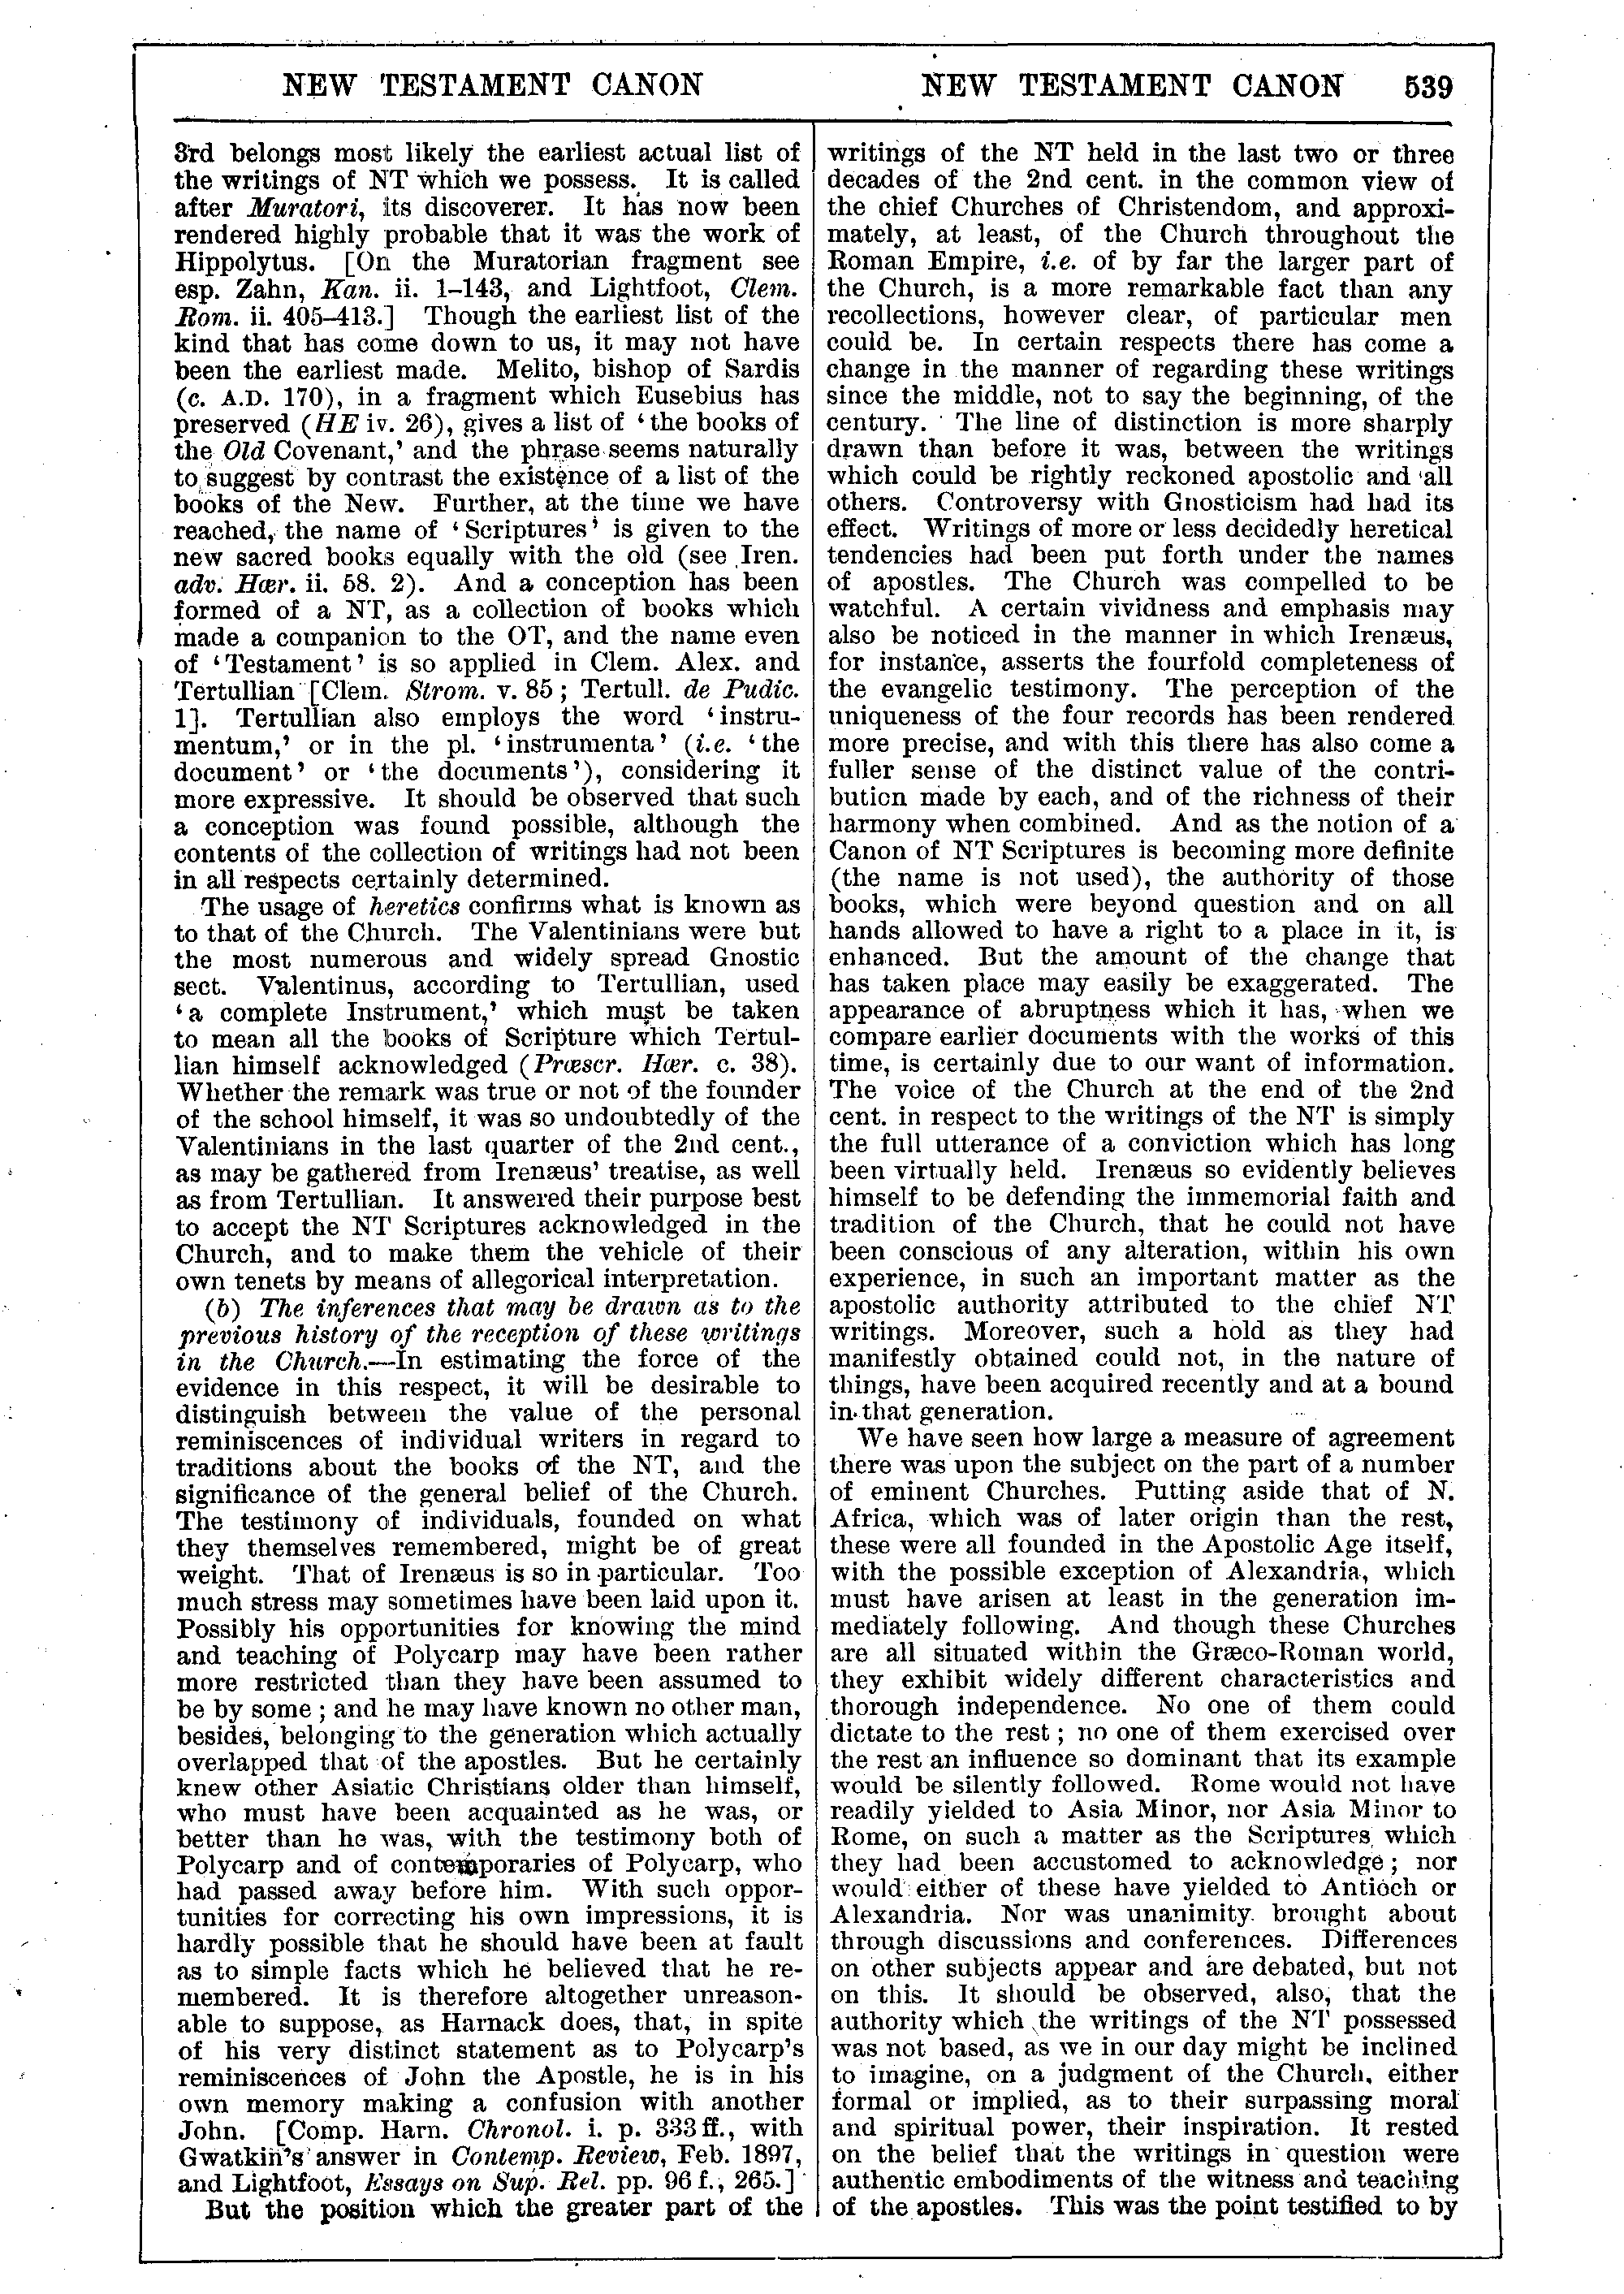 Image of page 539